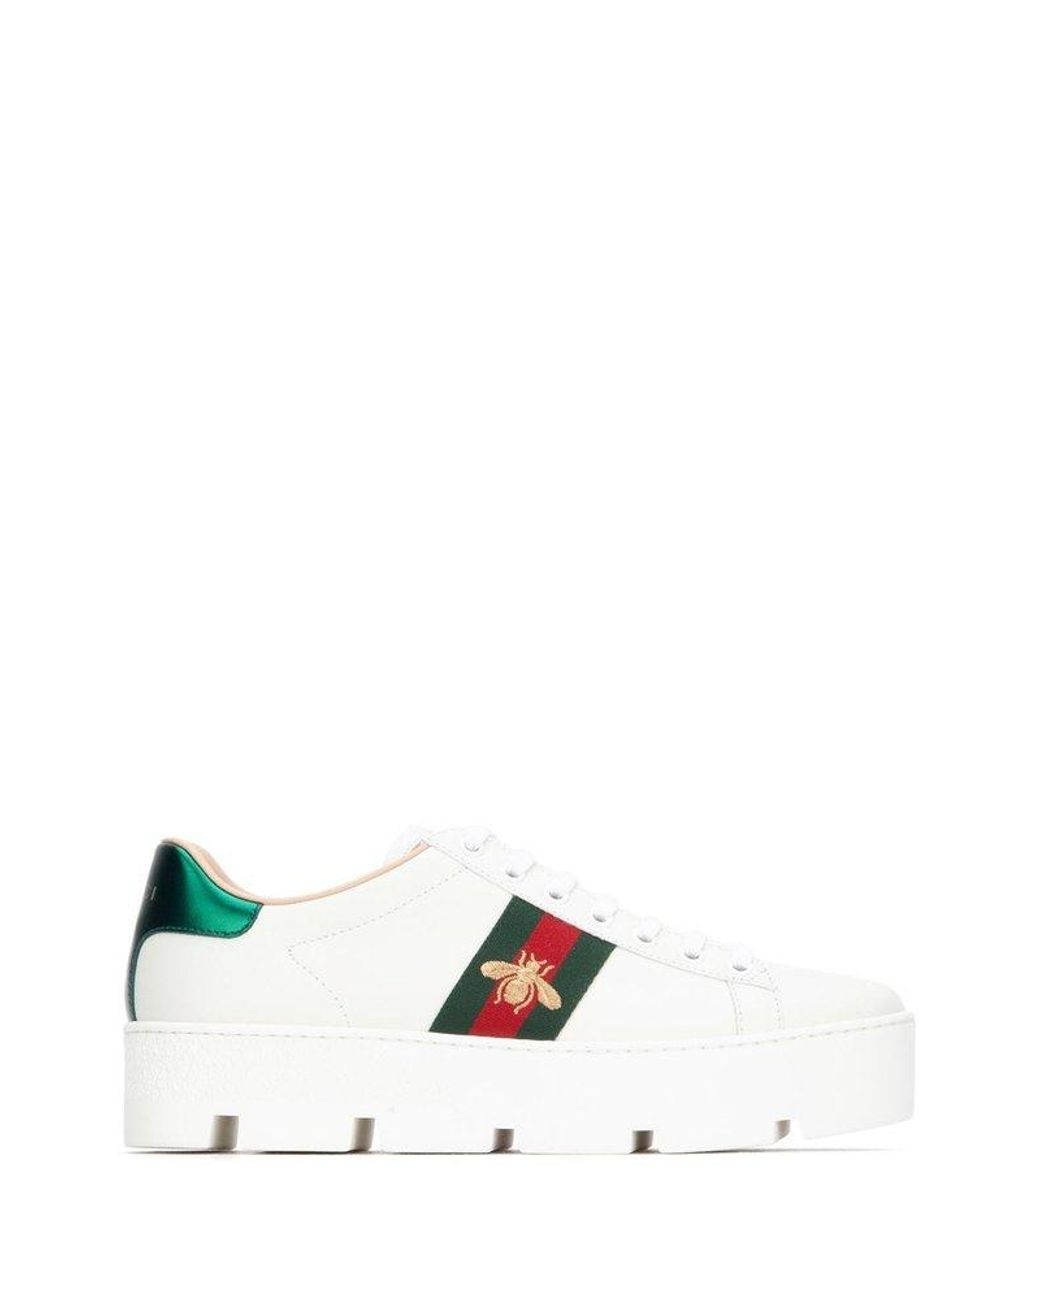 Gucci Ace Platform Sneakers in White | Lyst